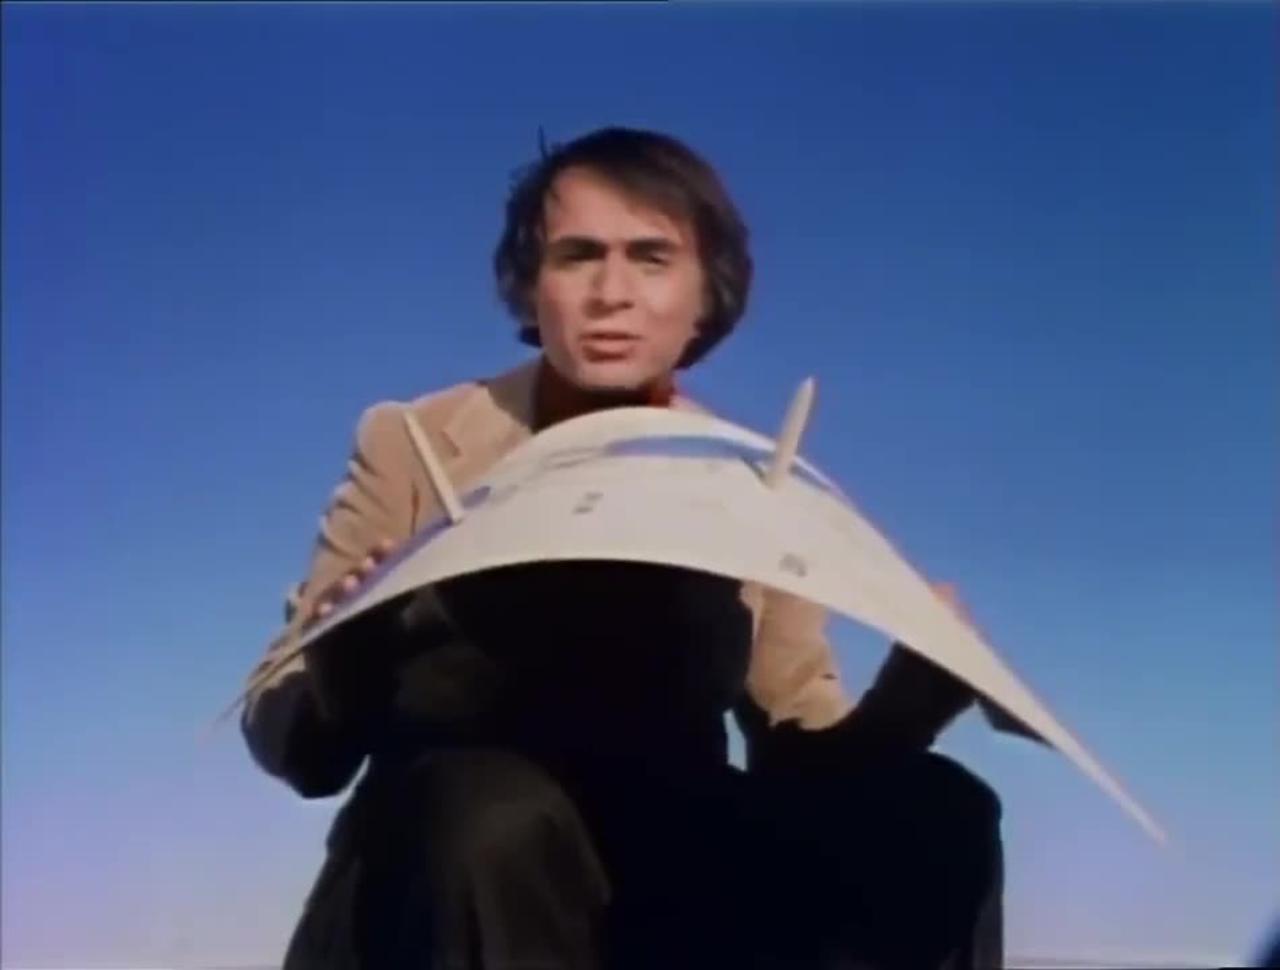 Carl Sagan explains how the ancient Greeks knew the earth was not flat